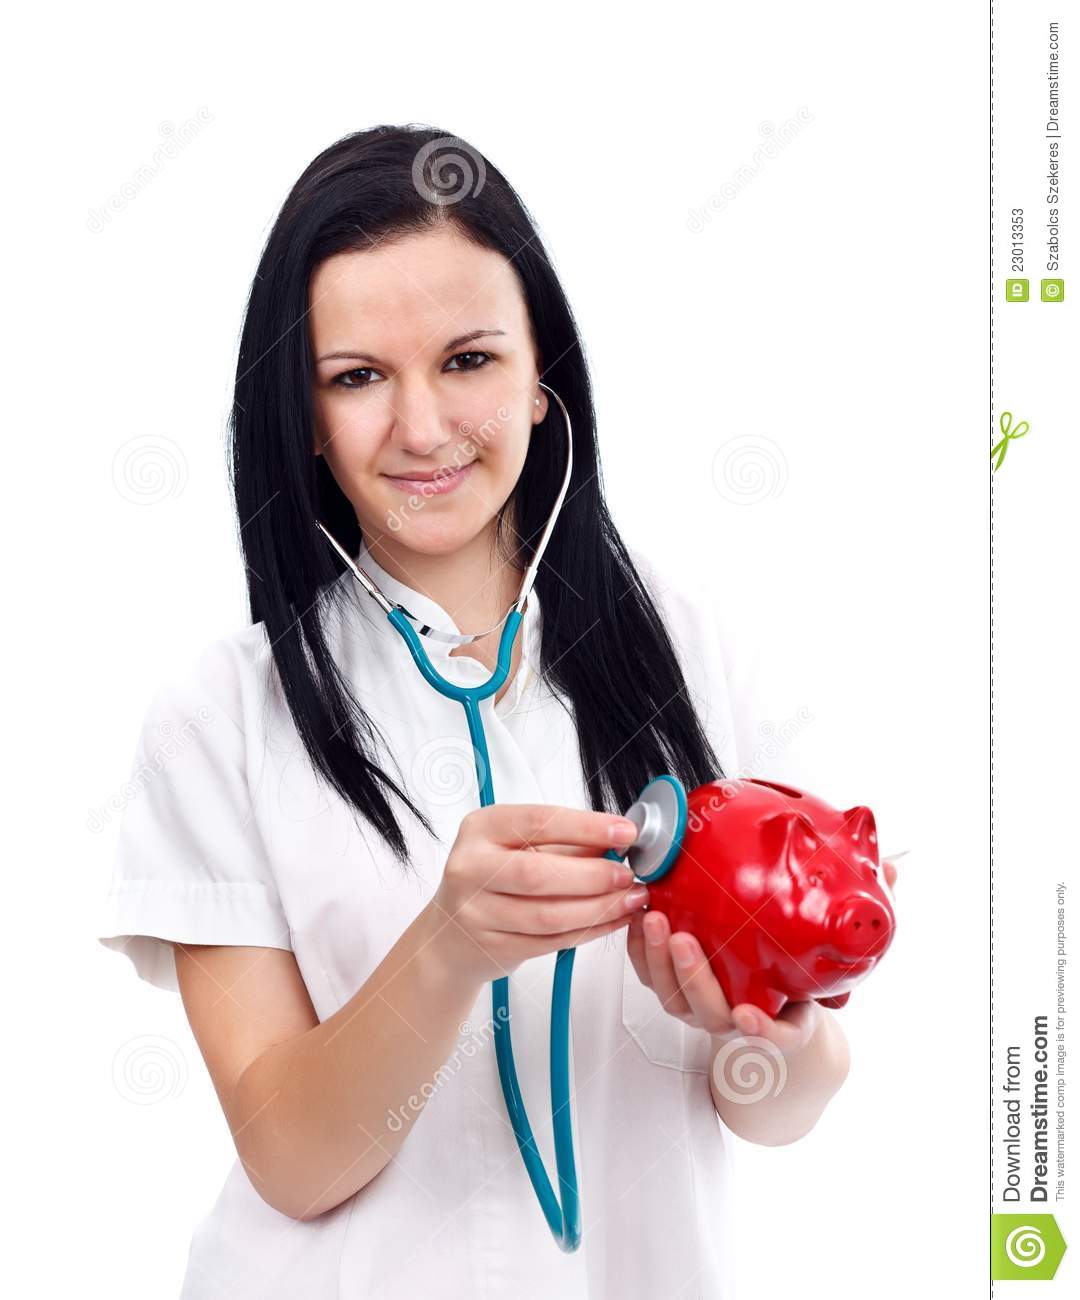 Smiling Nurse Checking The Heart Beat Of The Piggy Bank